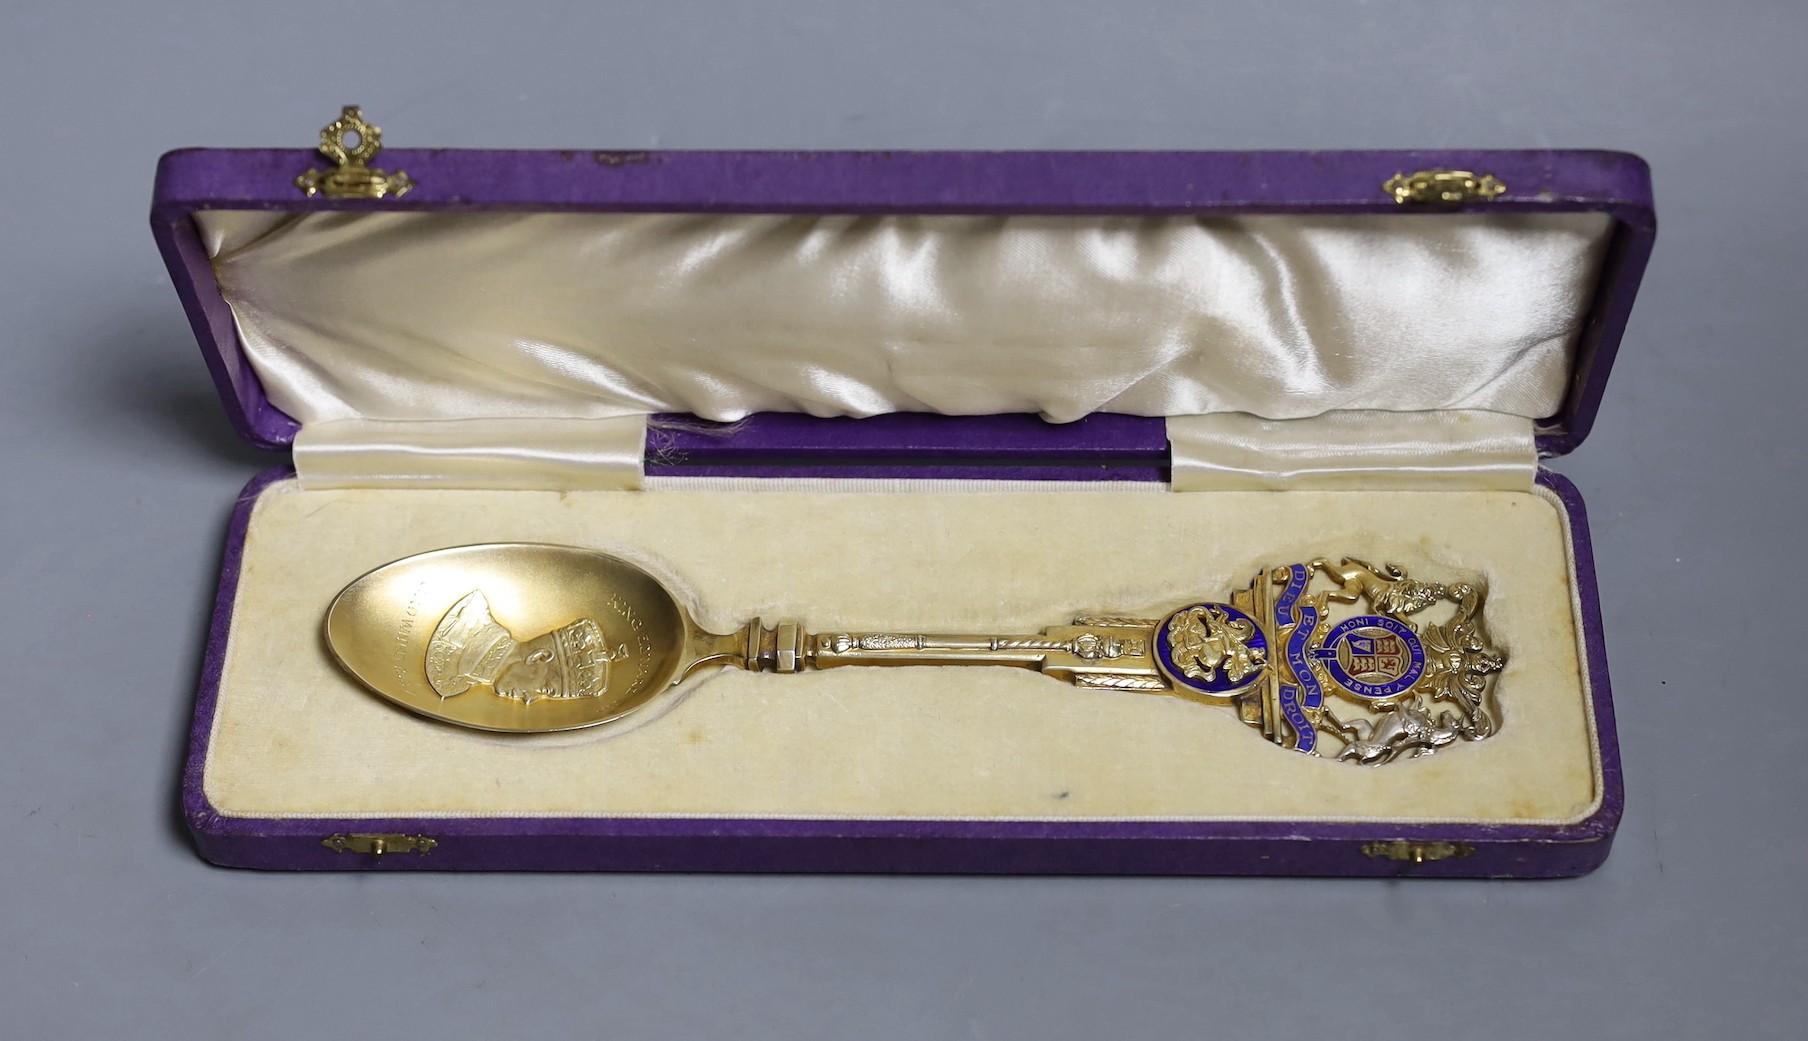 A cased Edward VIII Coronation silver gilt and enamel spoon, the bowl embossed with the bust of Edward VIII, Turner & Simson Ltd, Birmingham, 1936, 20.9cm, gross weight 98 grams.